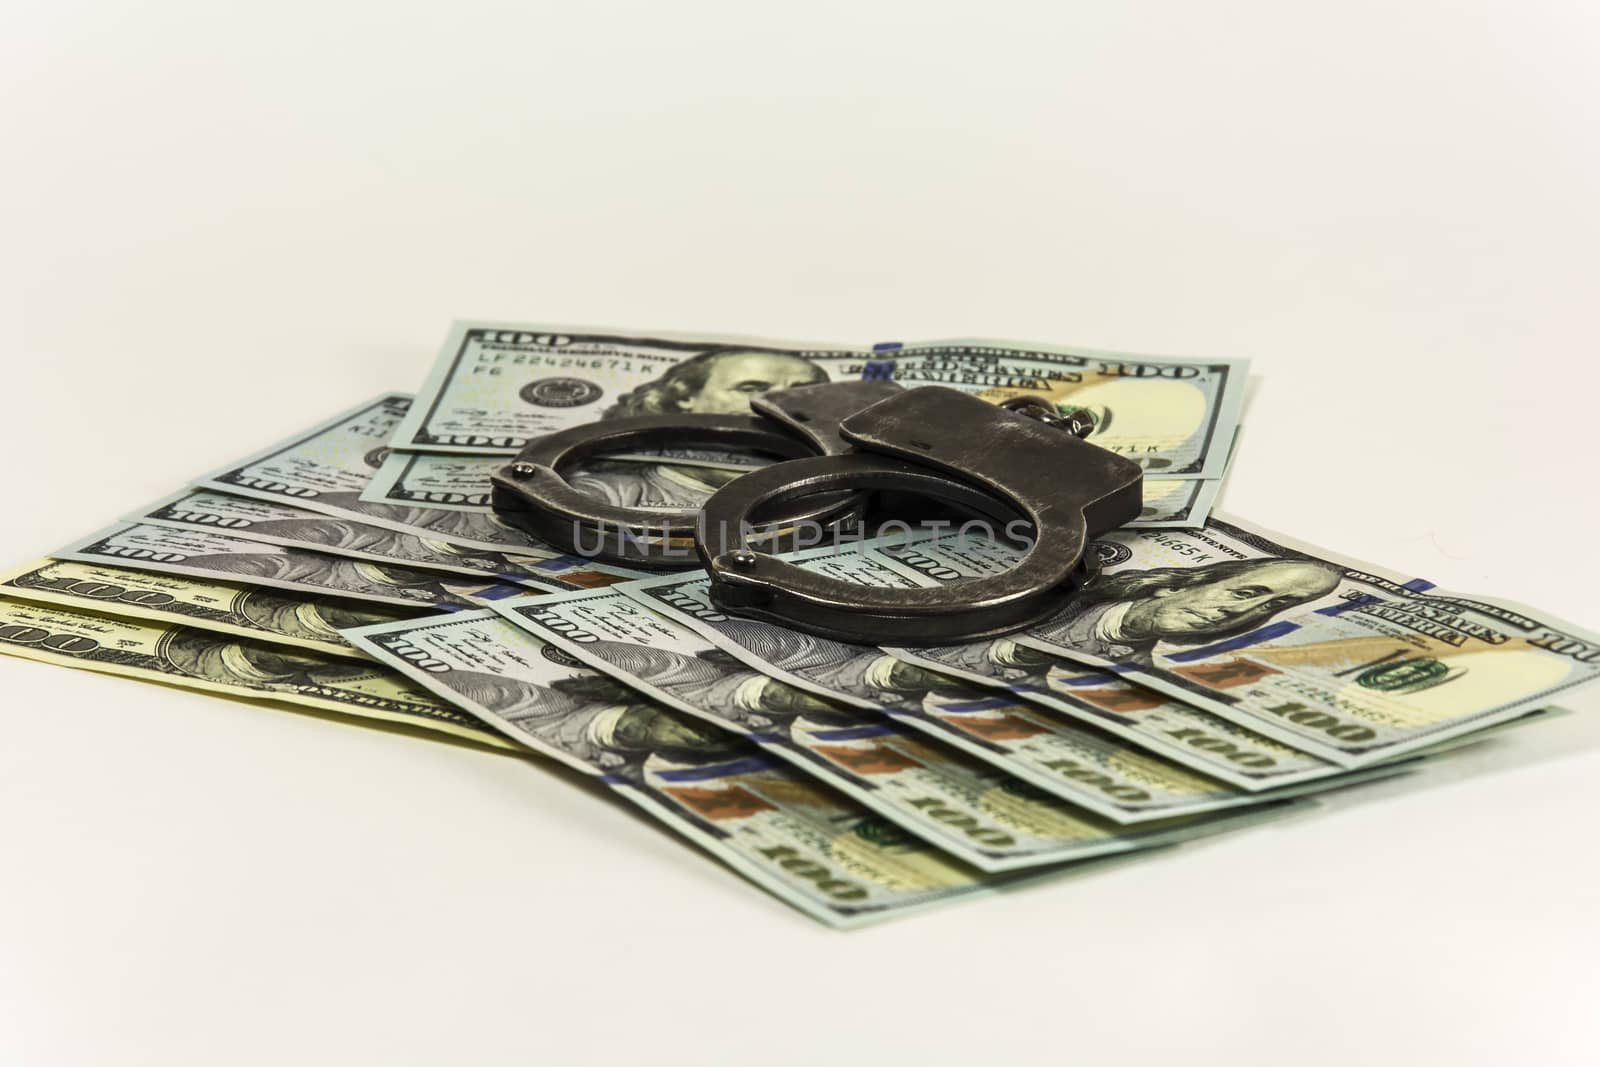 Metal handcuffs on banknotes US dollars by Grommik